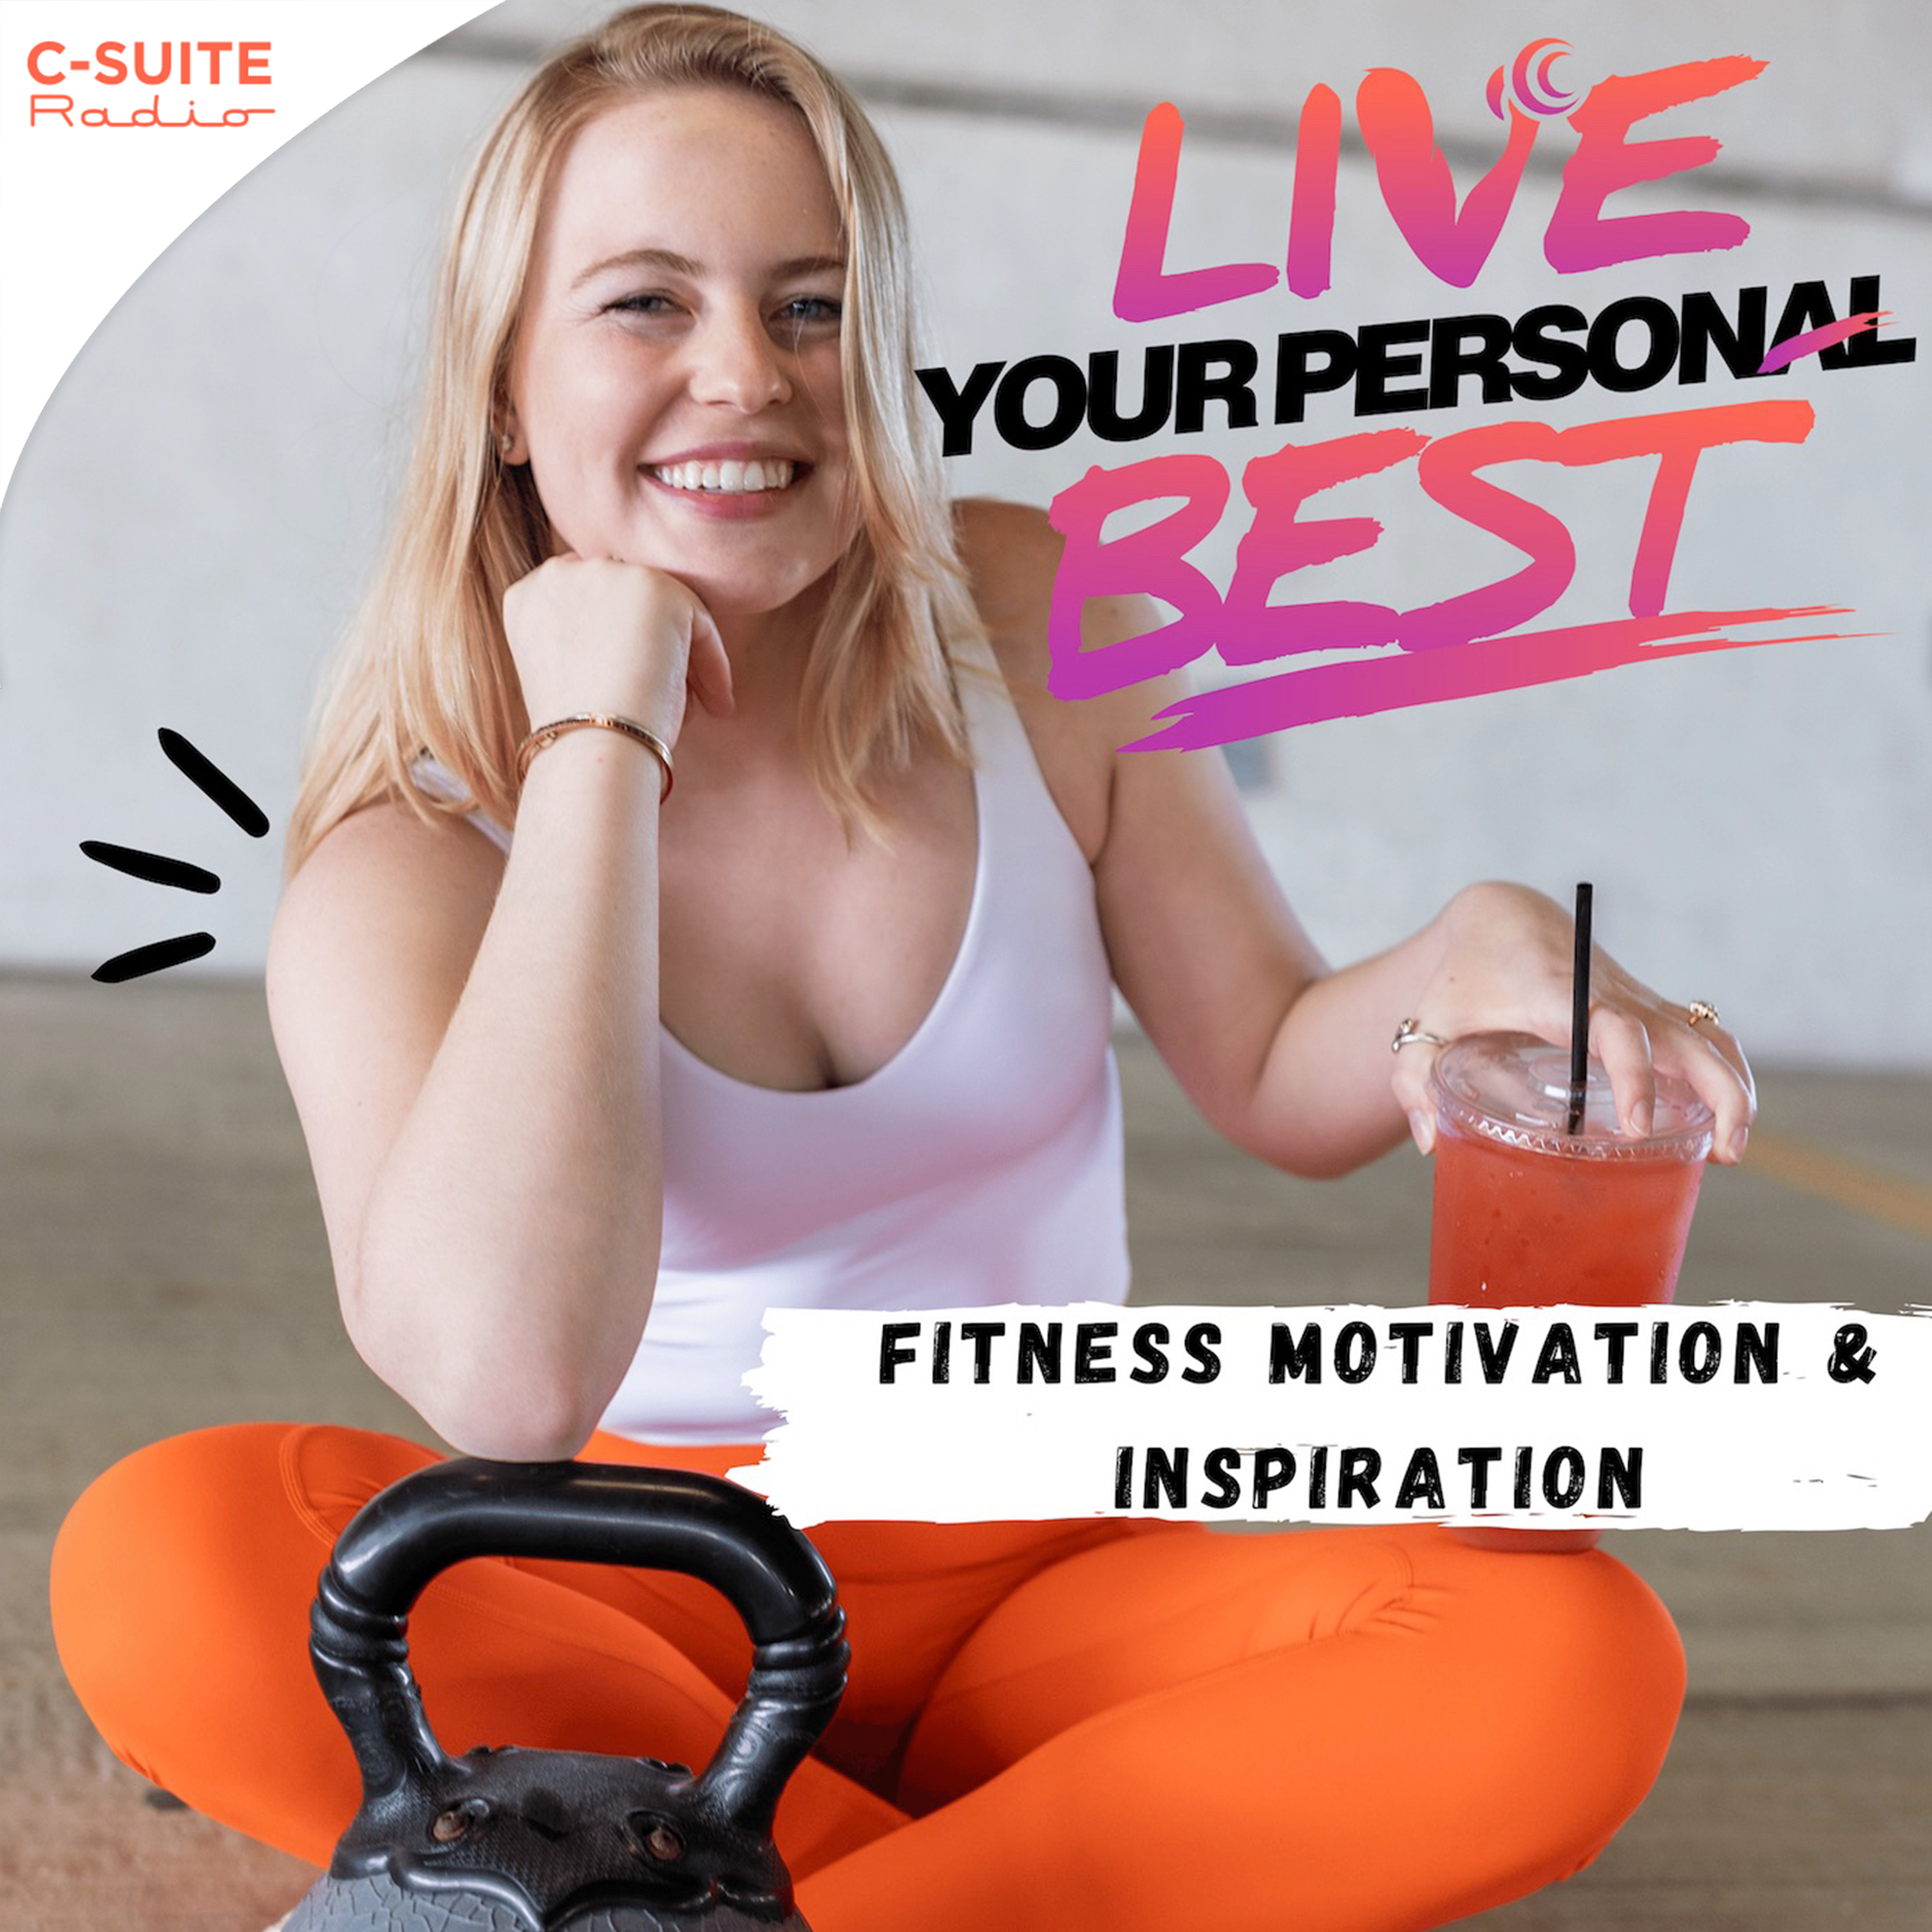 Live Your Personal Best  –  Workout Motivation and Healthy Living For Current and Former Athletes